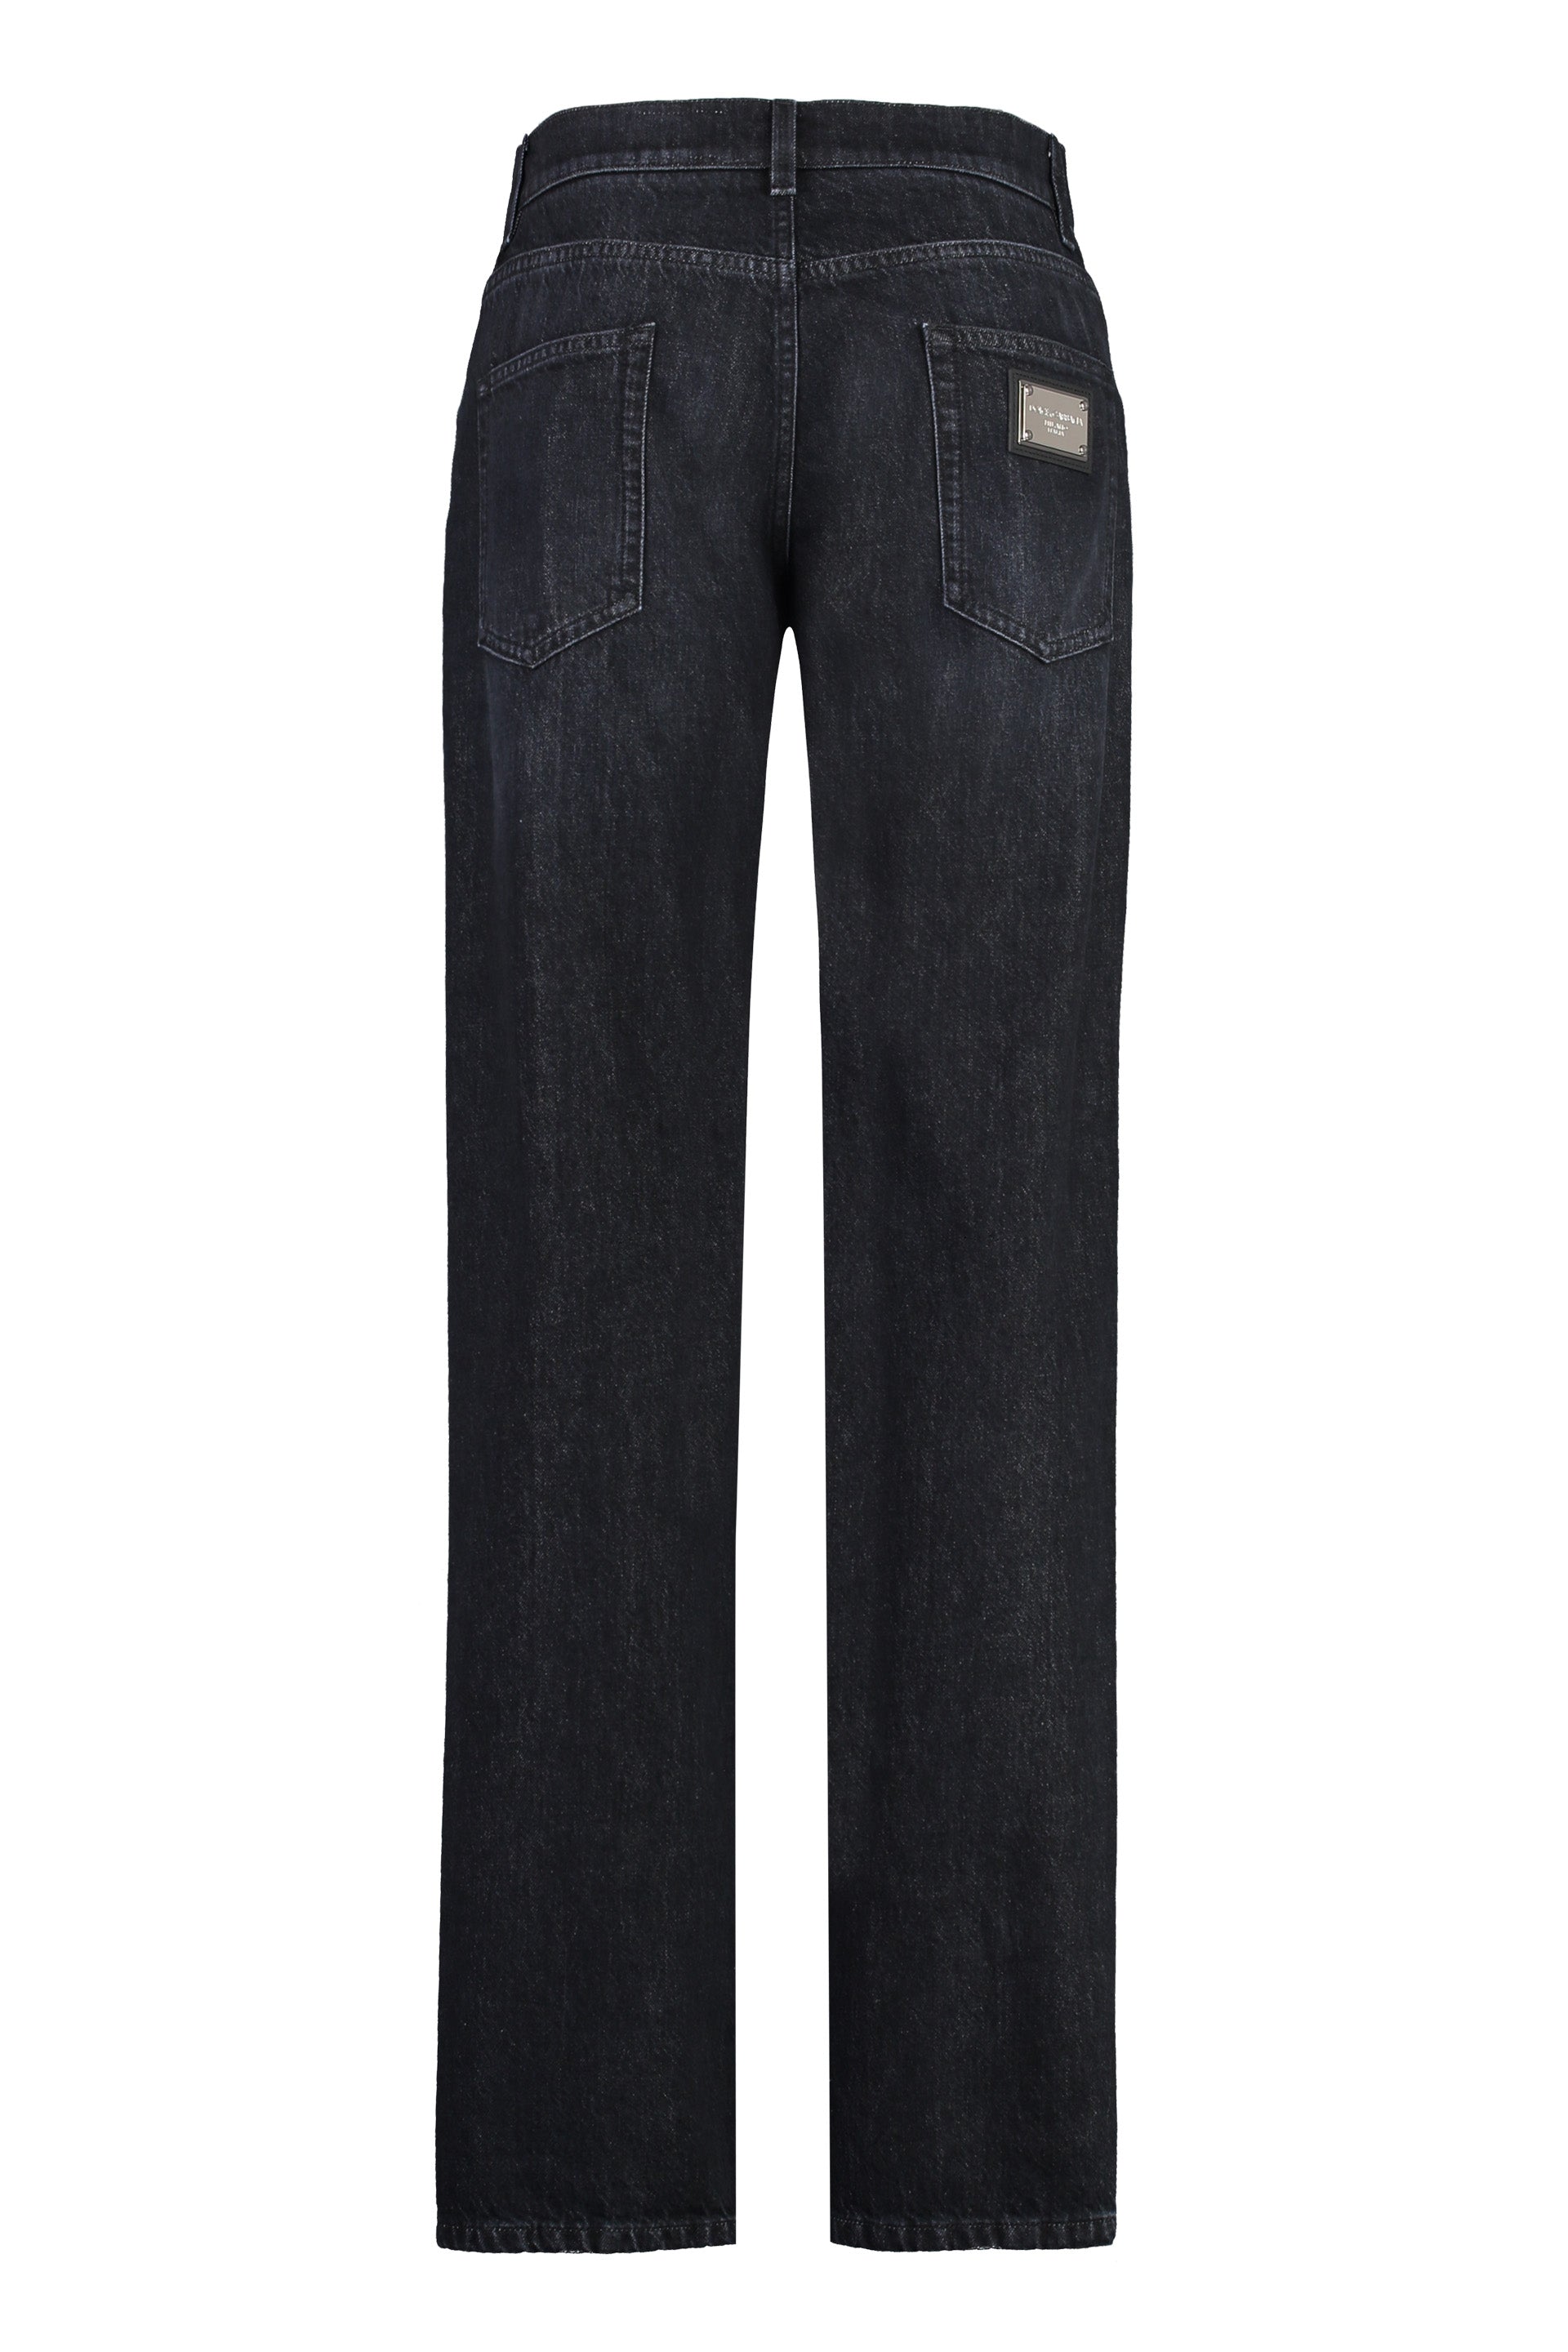 Shop Dolce & Gabbana Men's Black Straight-leg Jeans With Metal Accents And 100% Cotton Fabric